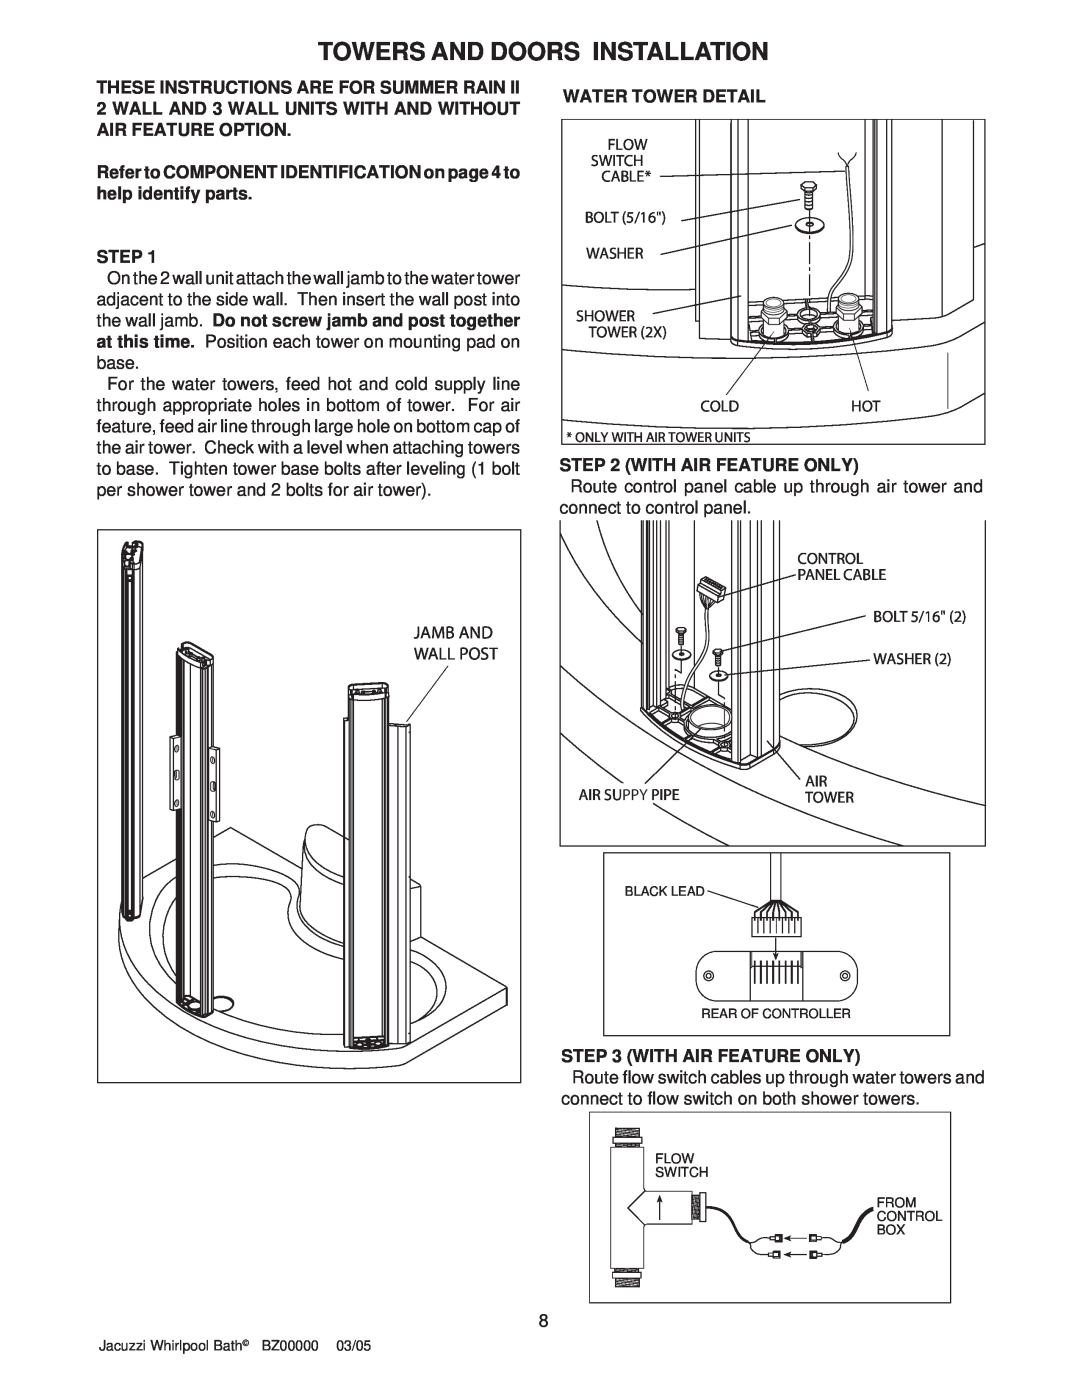 Jacuzzi BZ00000 Towers And Doors Installation, Refer to COMPONENT IDENTIFICATION on page 4 to help identify parts, Step 